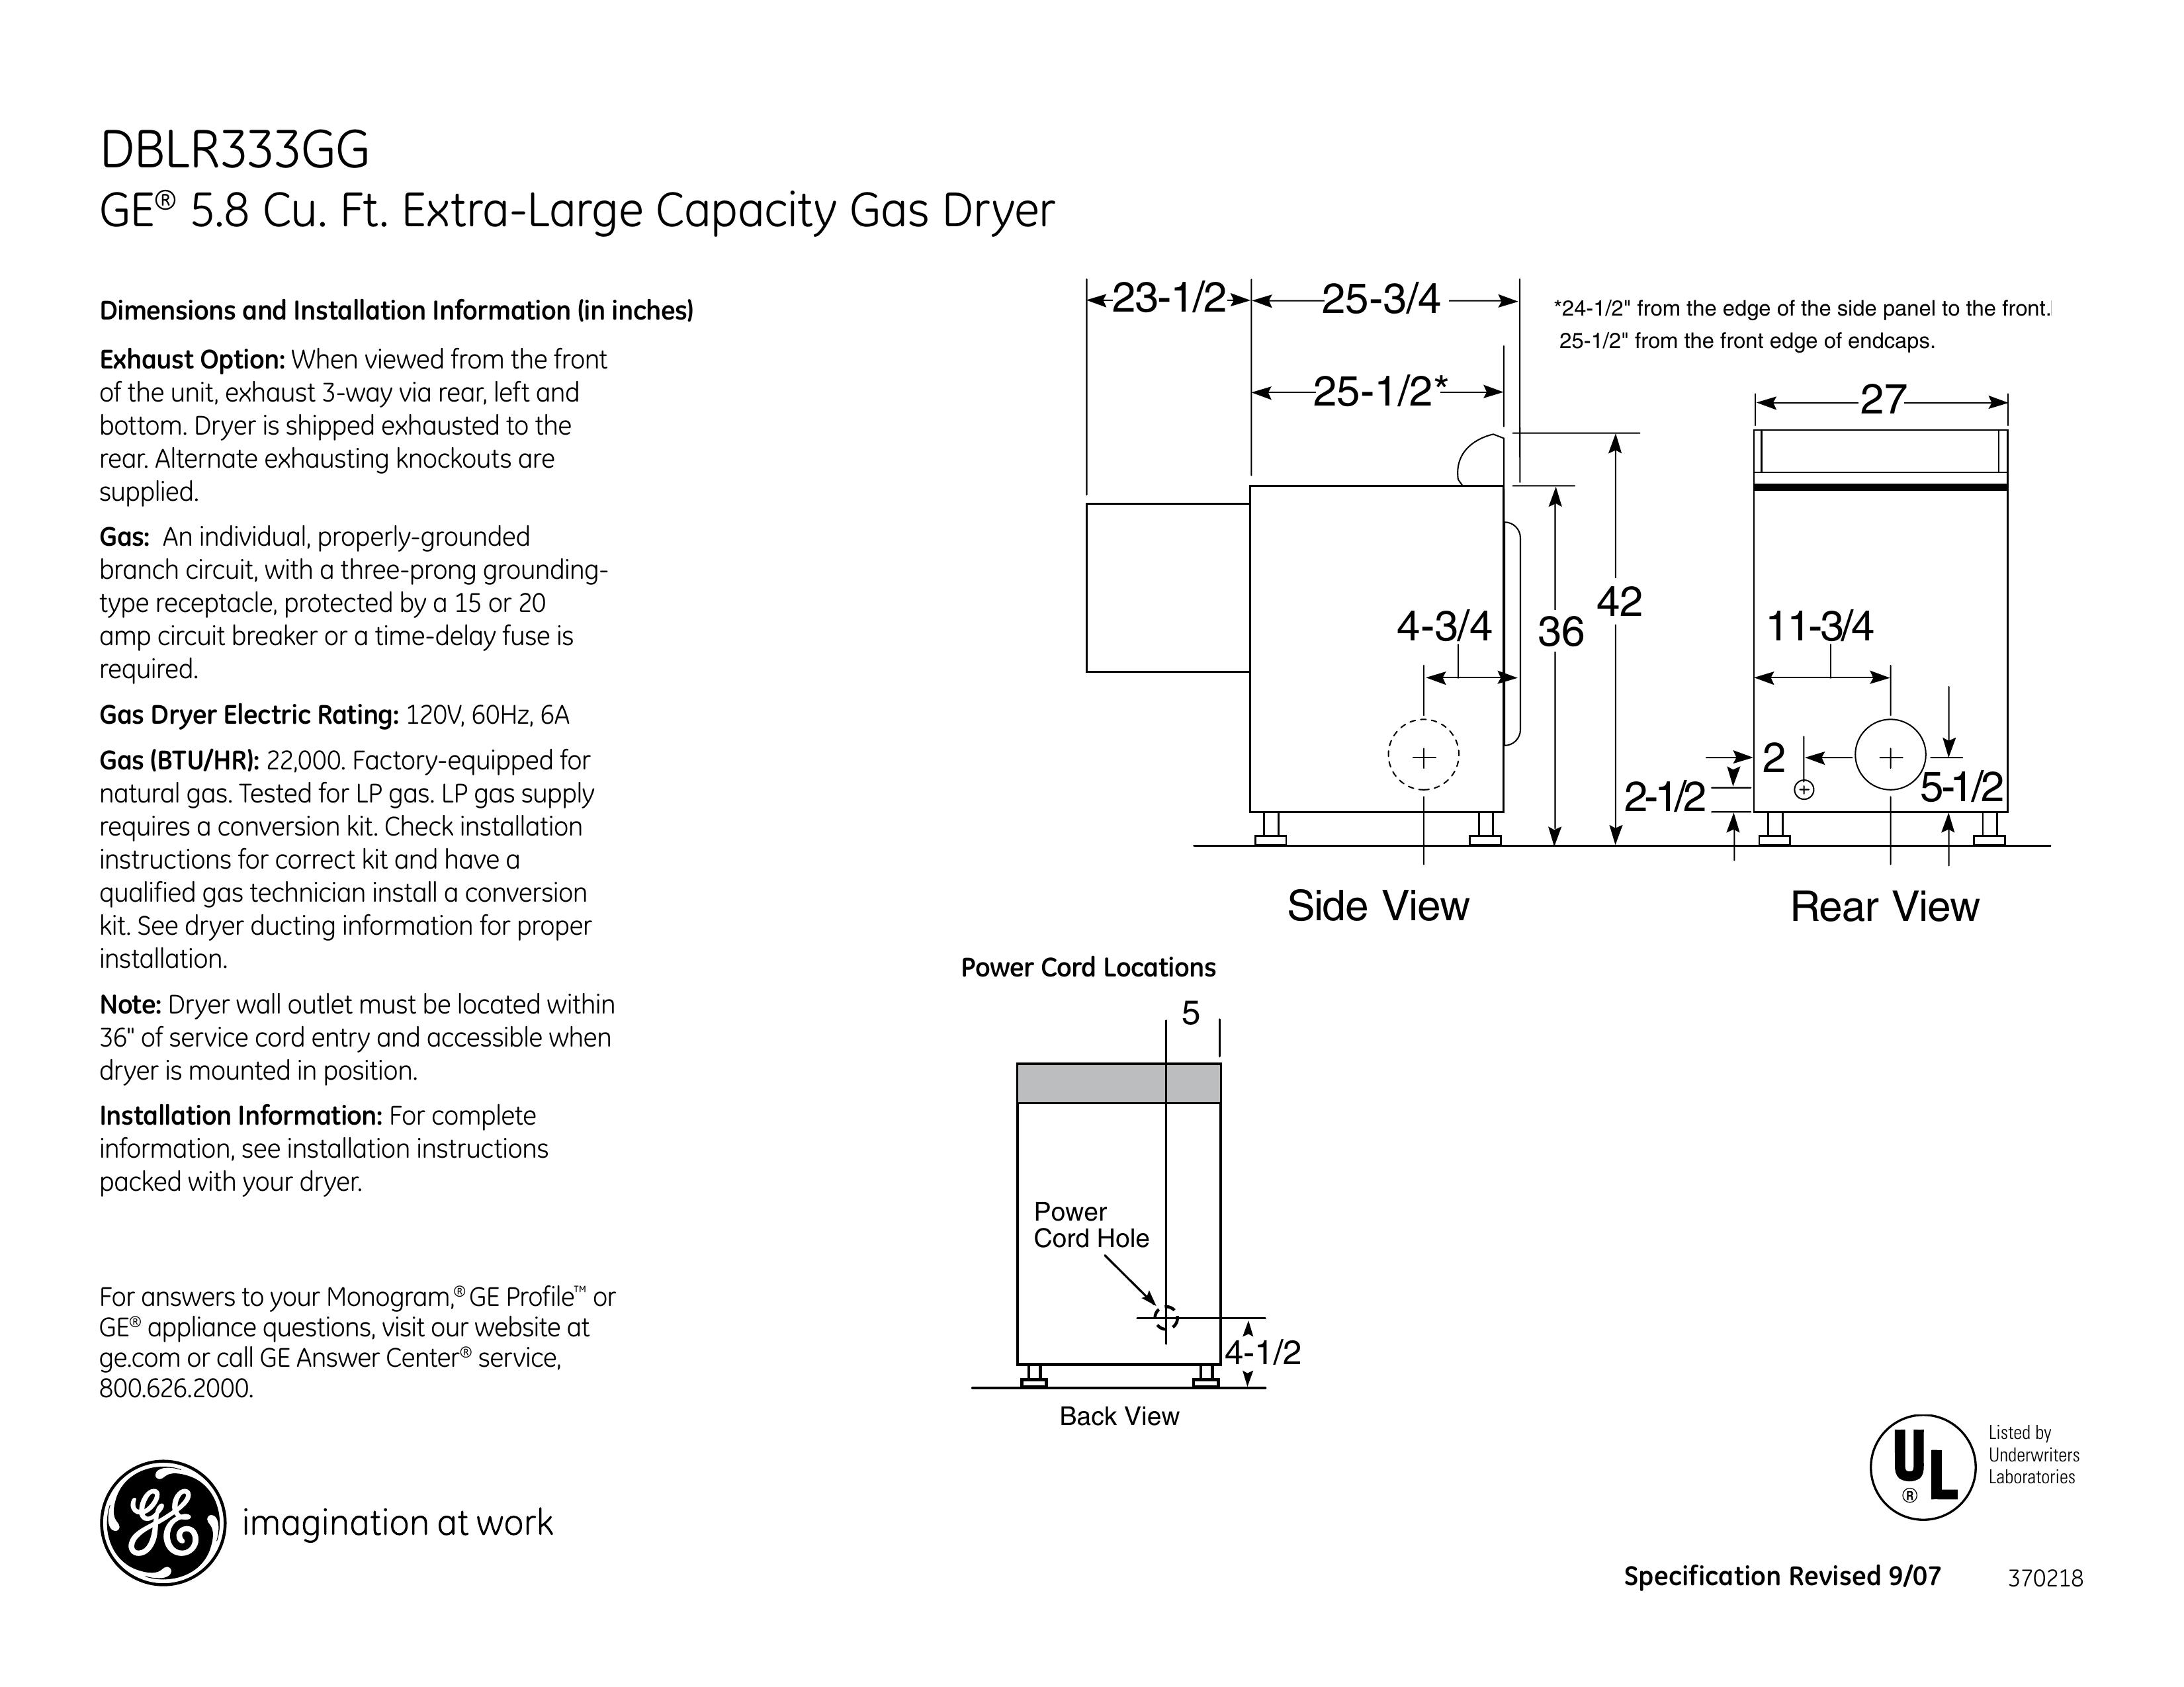 GE DBLR333GG Clothes Dryer User Manual